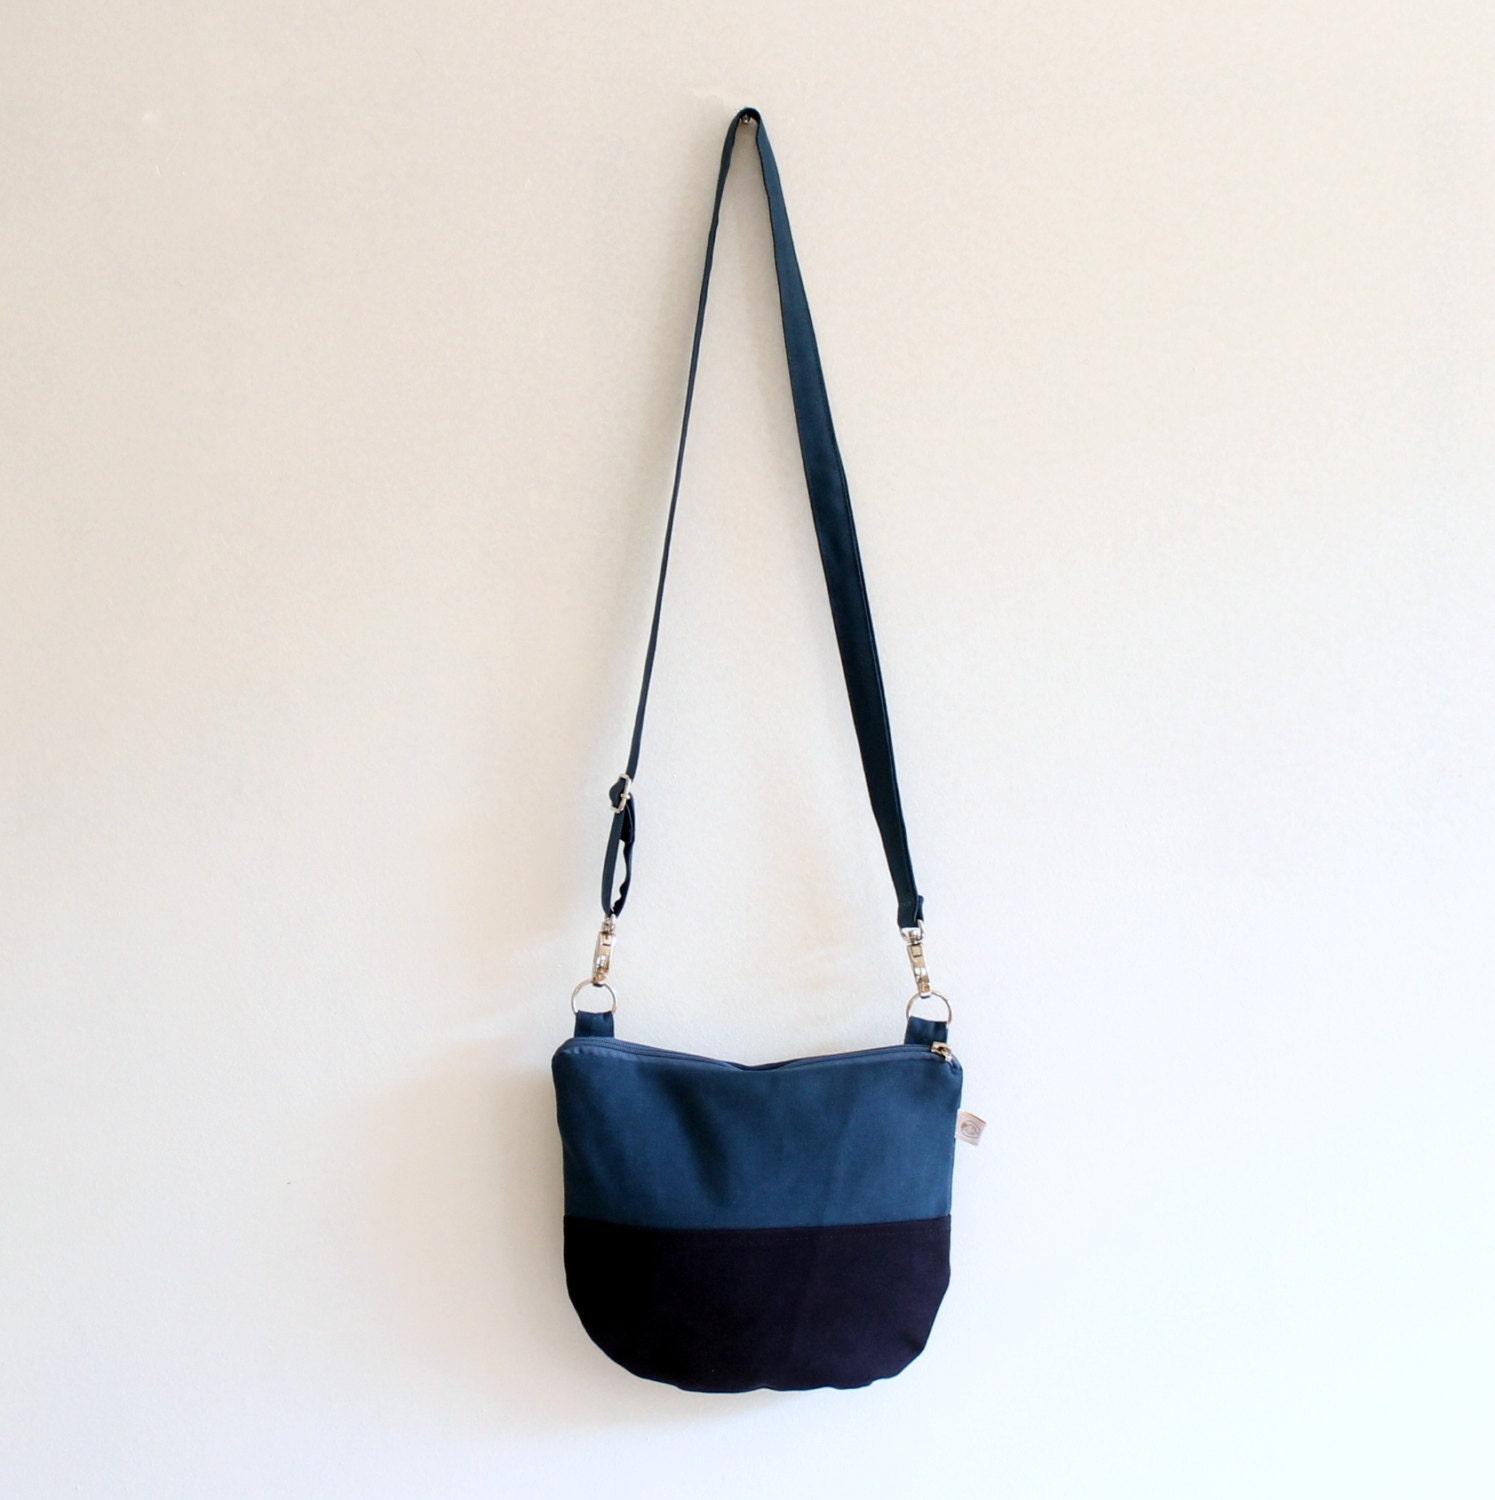 Daily Canvas Cross Body Bag Teal Navy Colors Messenger Bag - Etsy